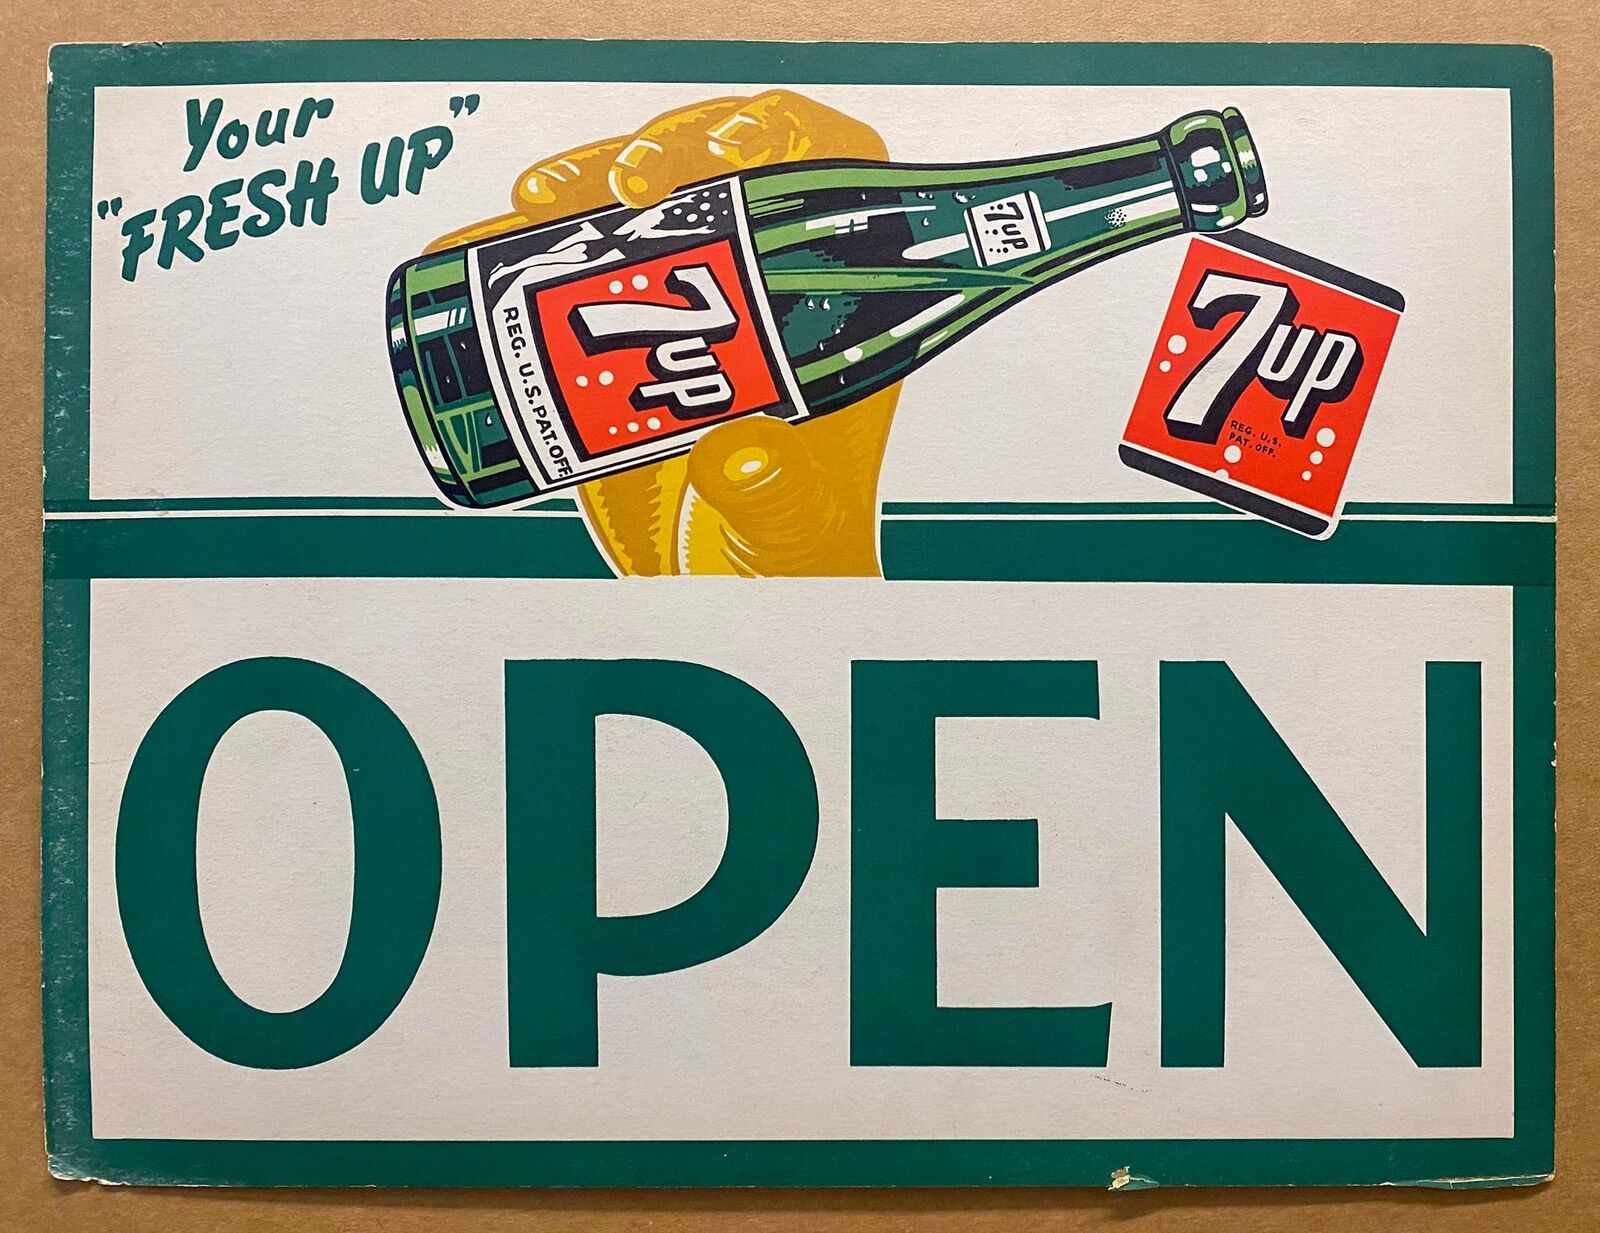 1940s 7Up Your Fresh Up Open Closed Doubled Sided Advertising Door Sign ORIGINAL